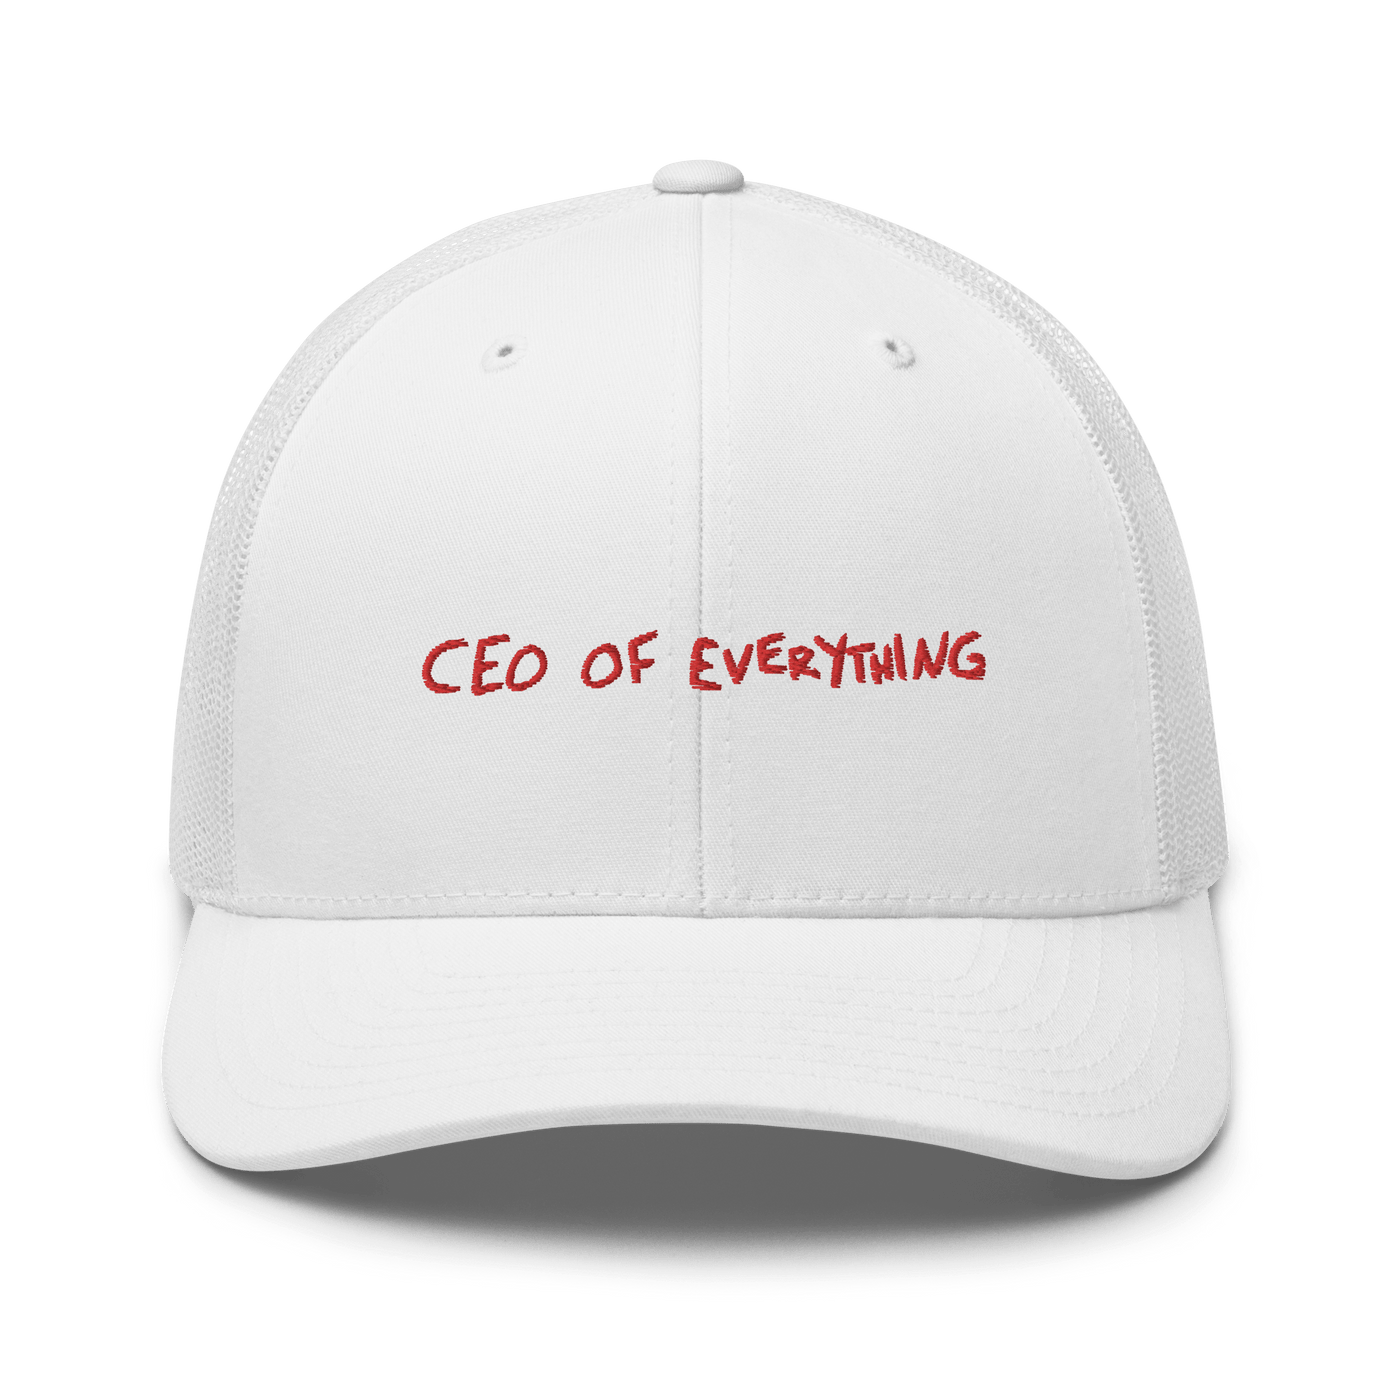 CEO of everything Trucker Cap - White - - Just Another Cap Store